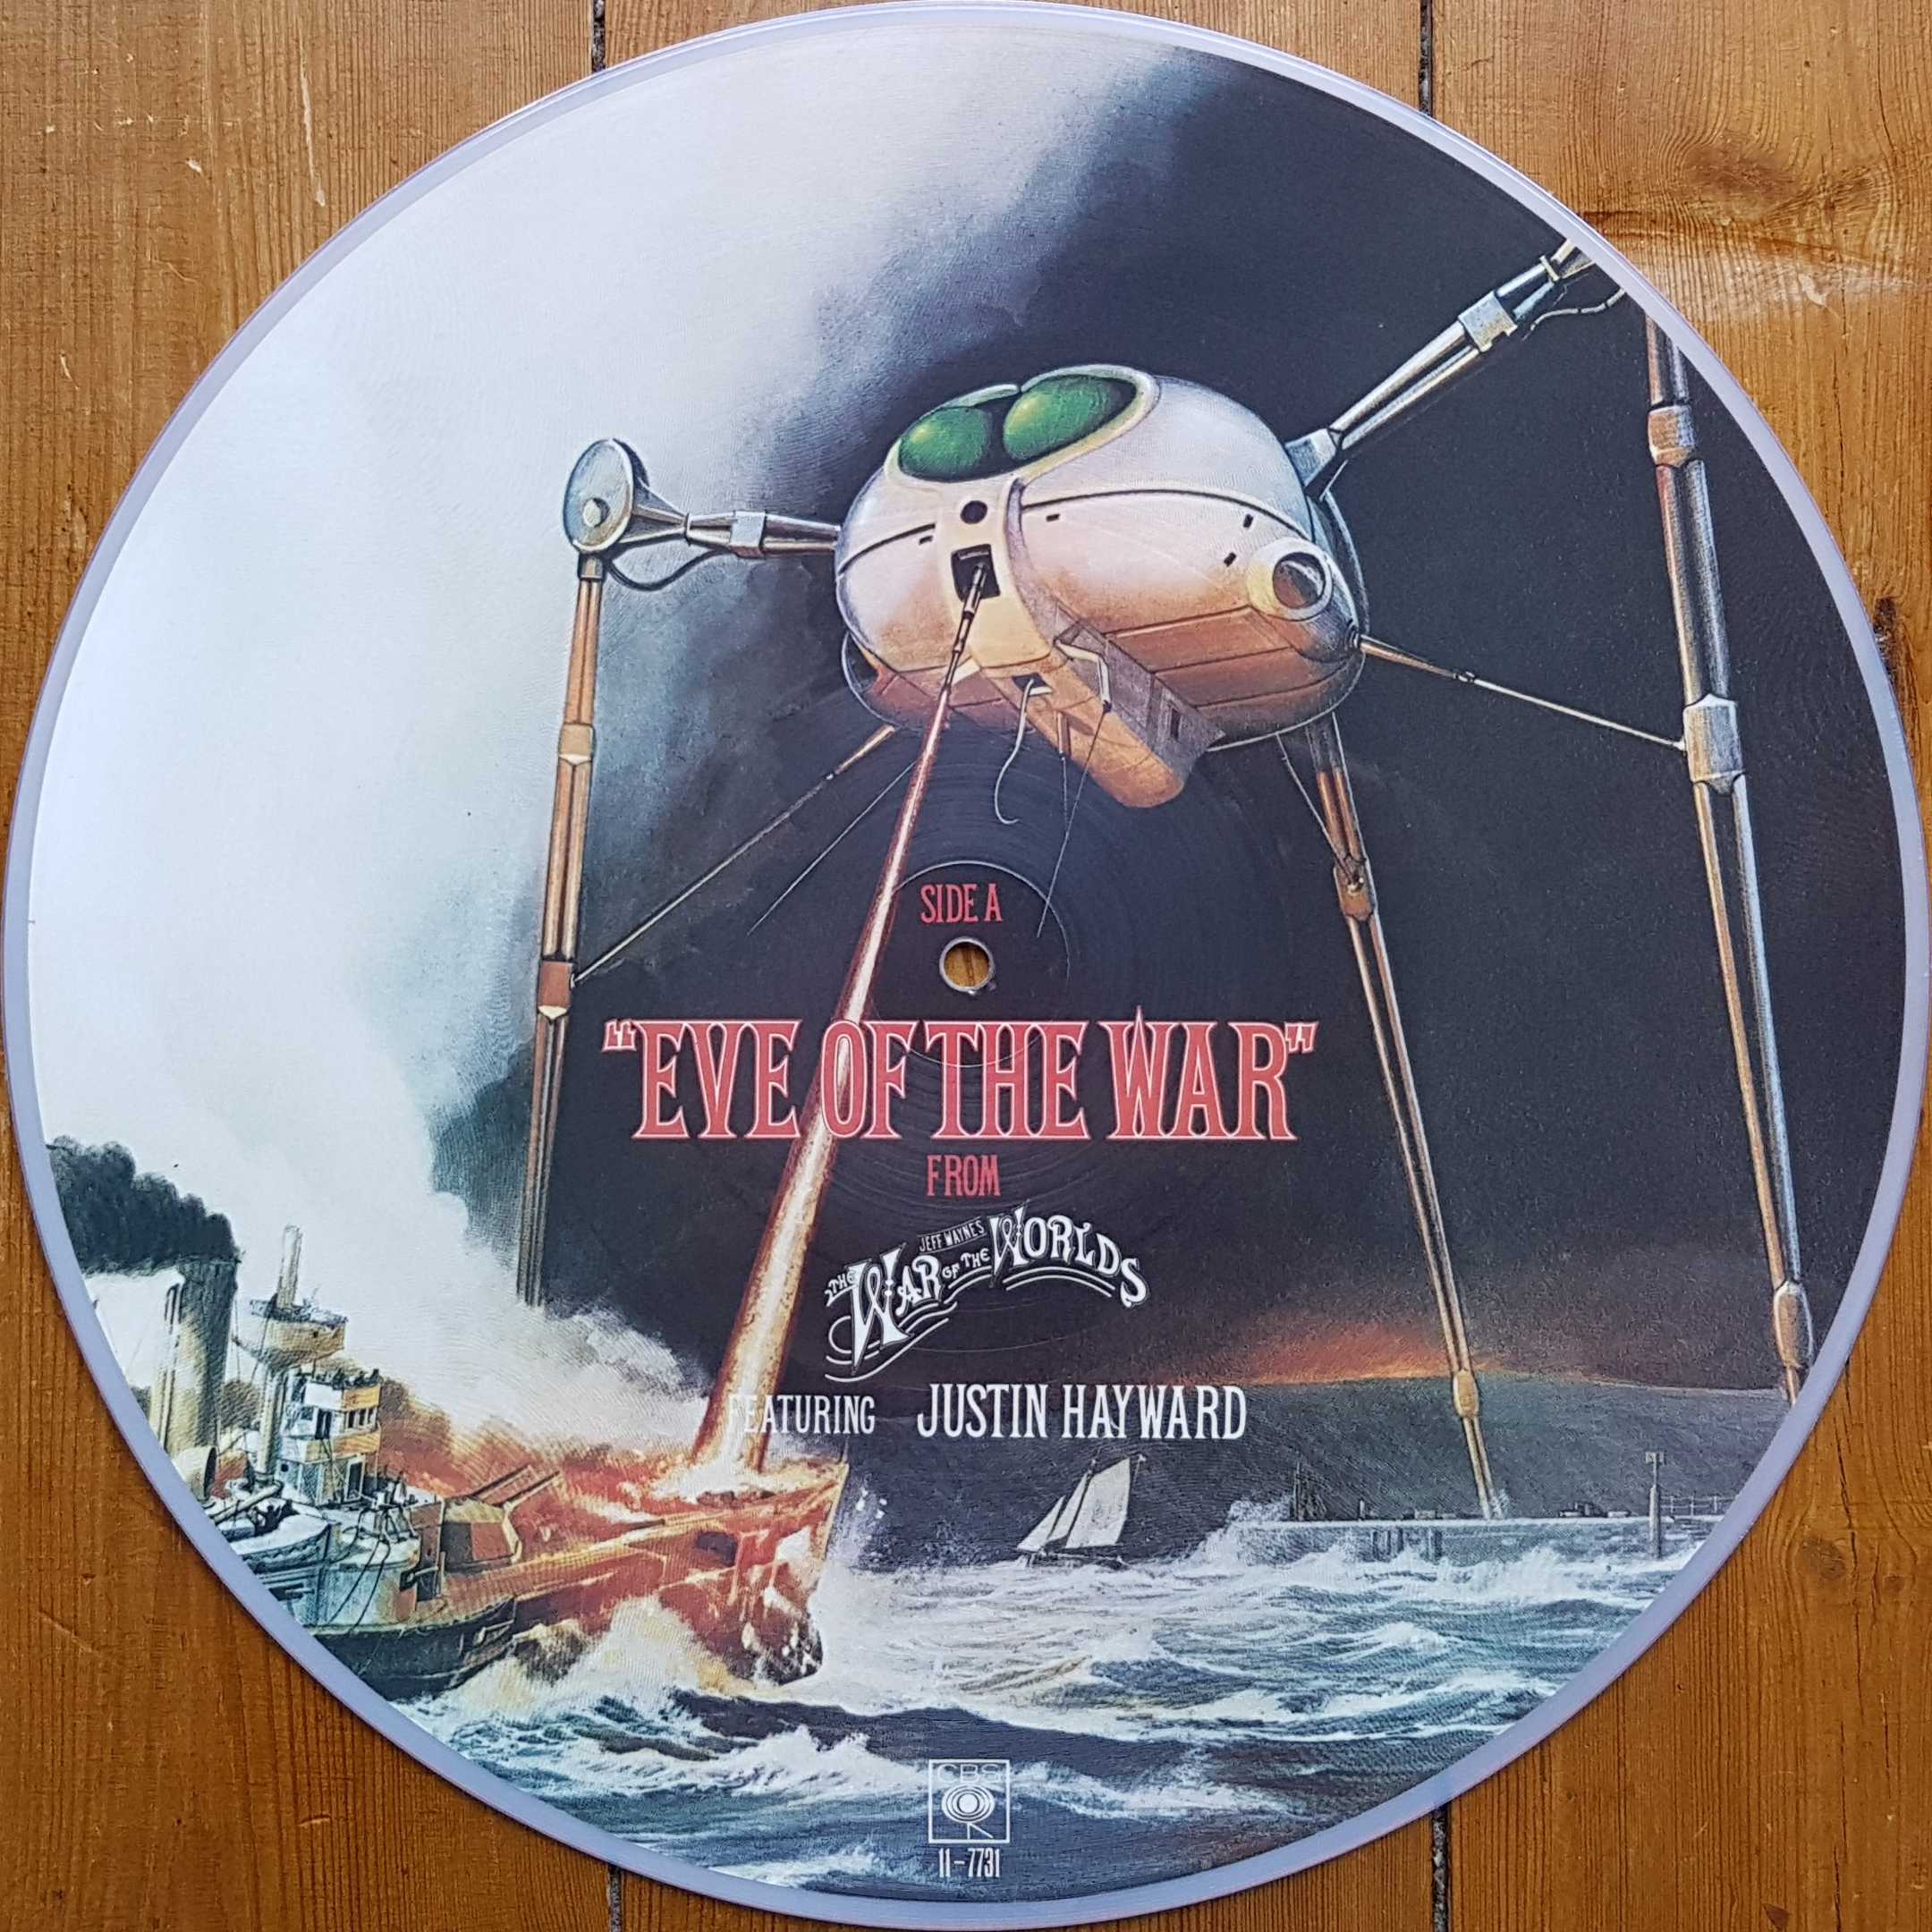 Picture of CBS 11 - 7731 Eve of war - Picture disc (War of the Worlds) by artist Jeff Wayne / Justin Hayward 